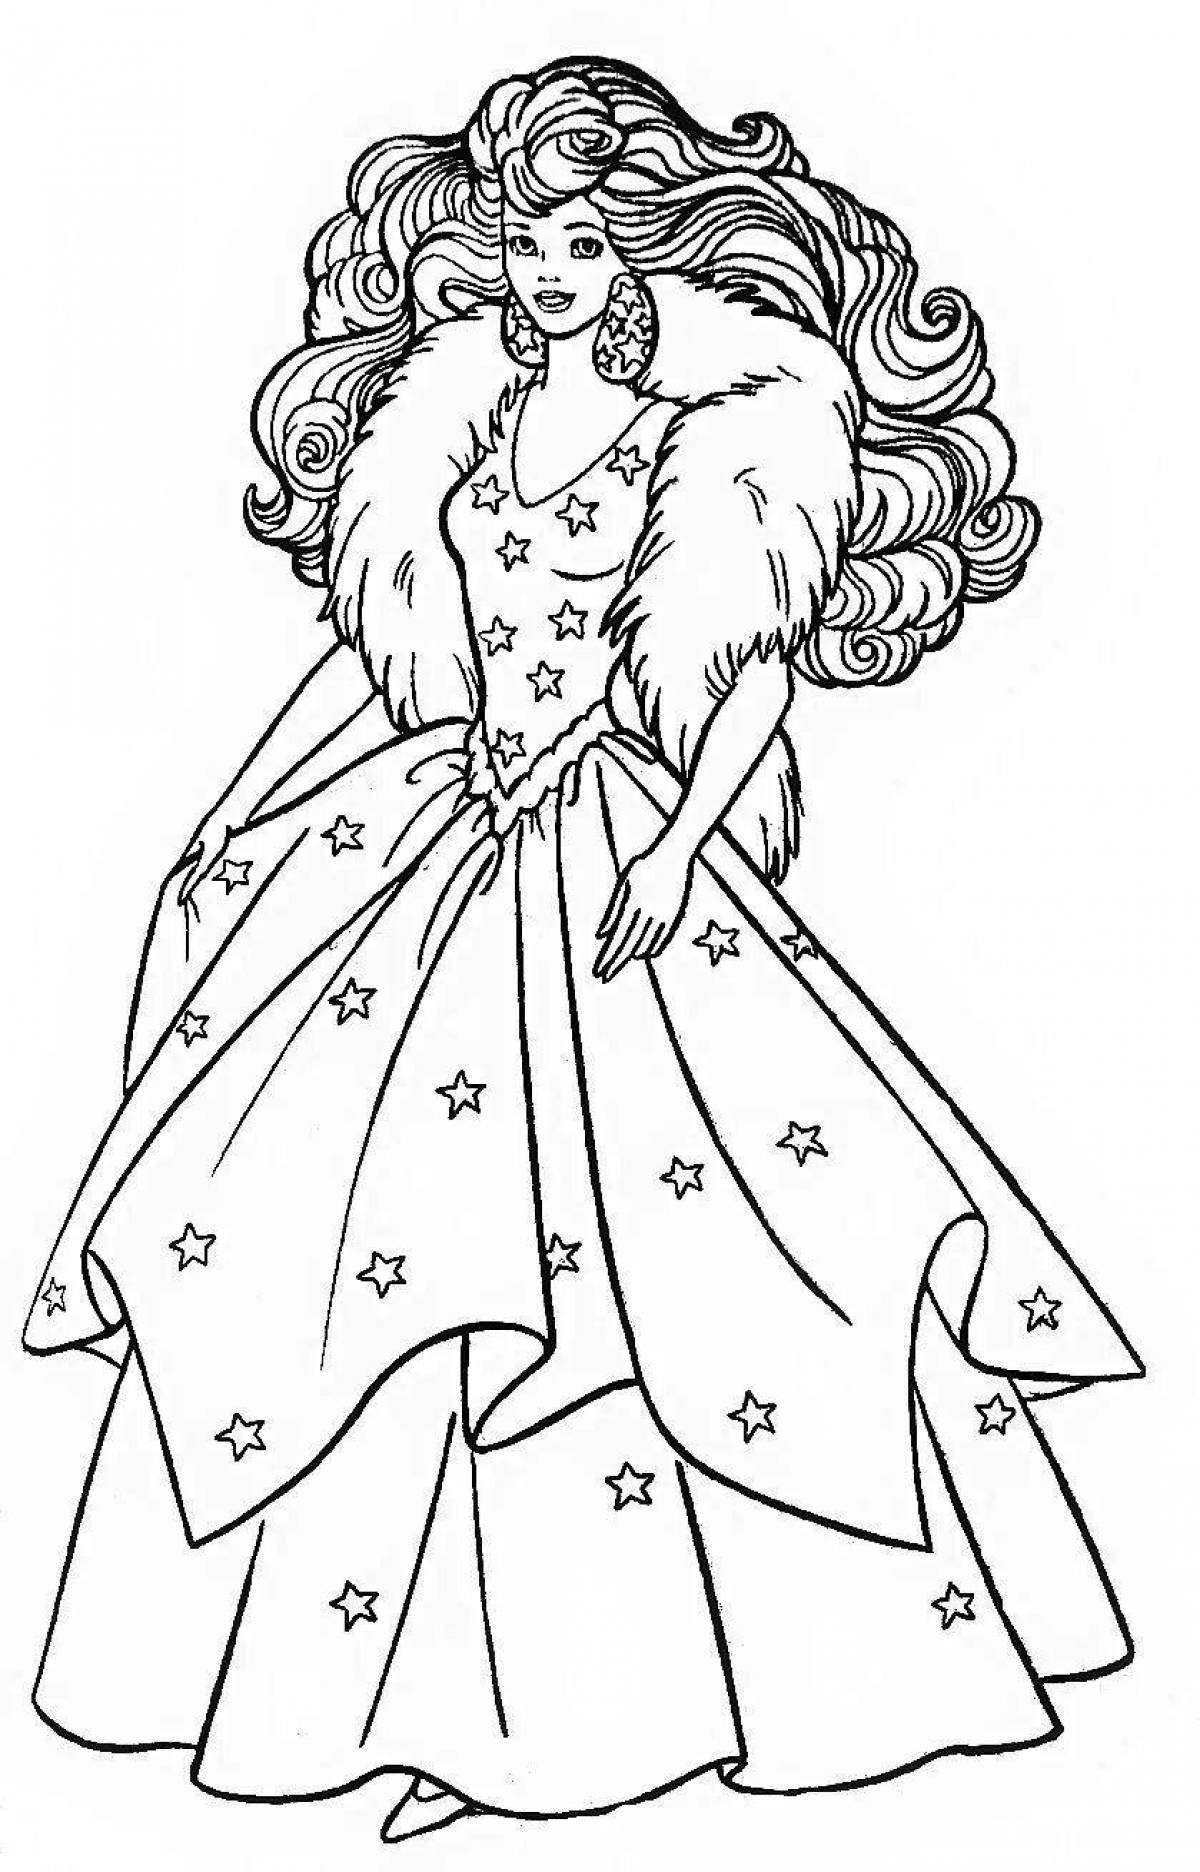 Sparkly 90s barbie coloring book